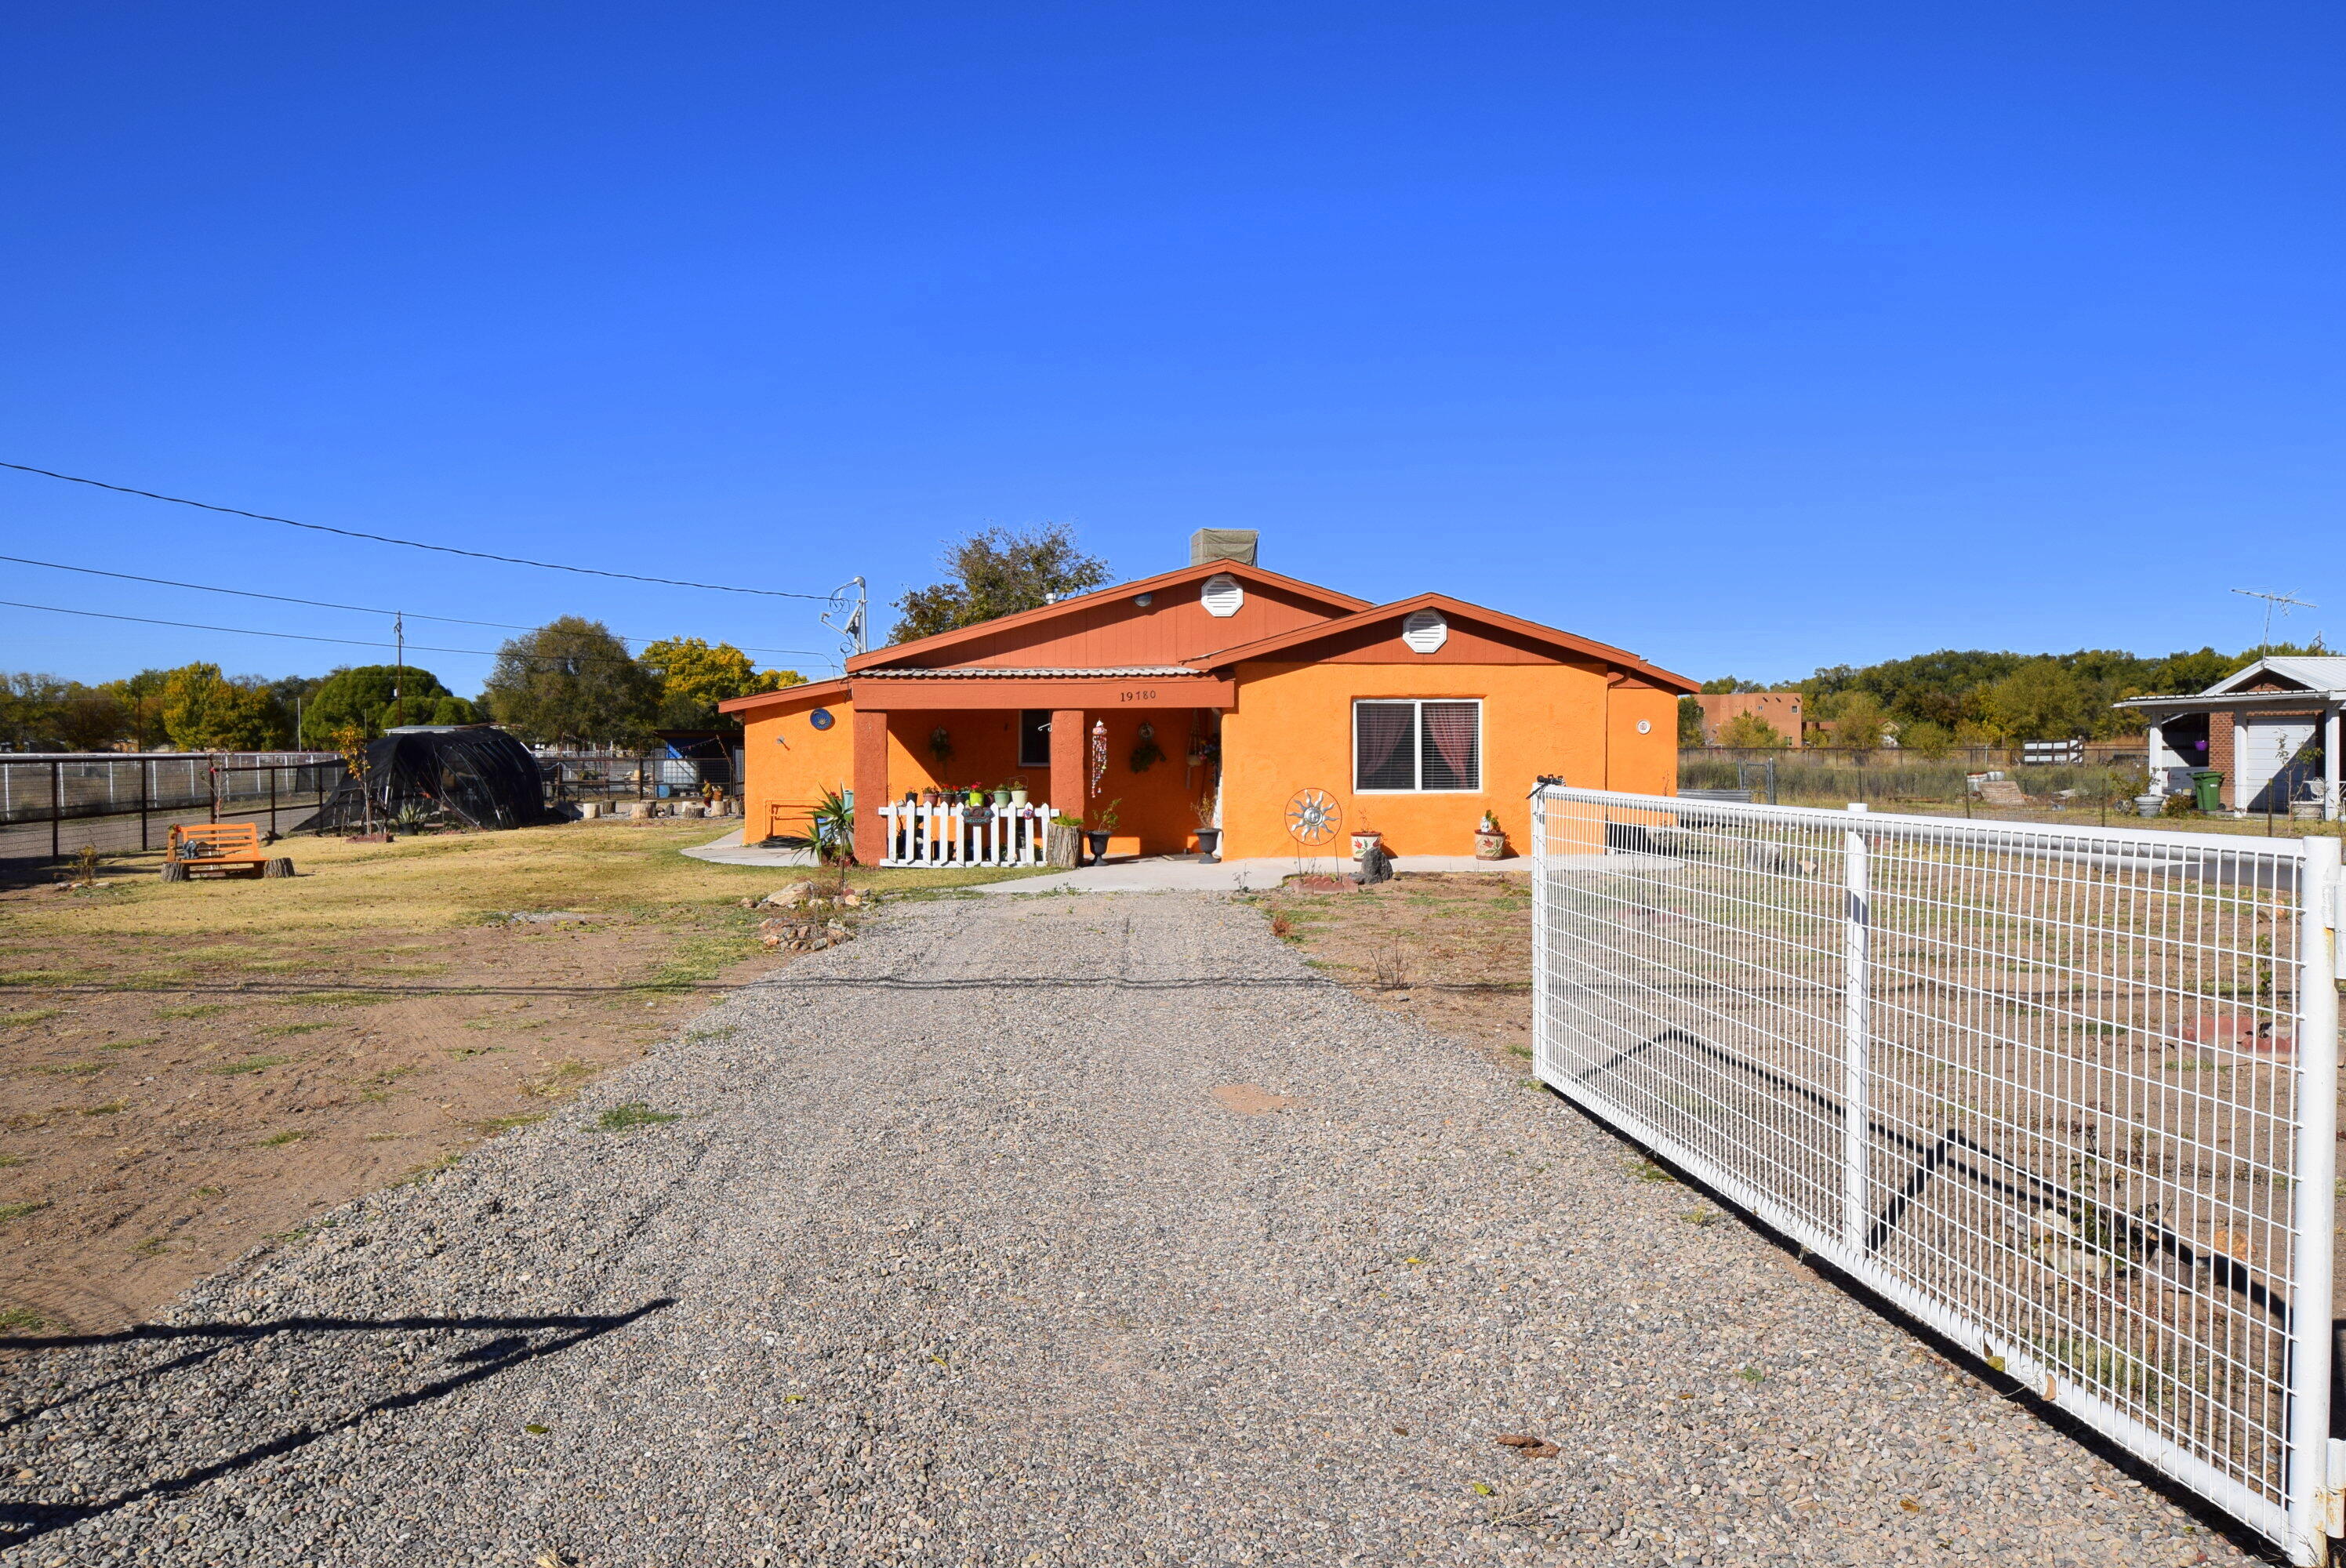 This home is located on 1.34 Acres with lots of expansion potential.   It has an unfinished unattached mother in law suite,   Large open spacious kitchen   including 2 bedrooms, possibly 3 with 1 bath.   Outdoors living area on 1.34 Acres.  Bring your horses, cows, goats etc.